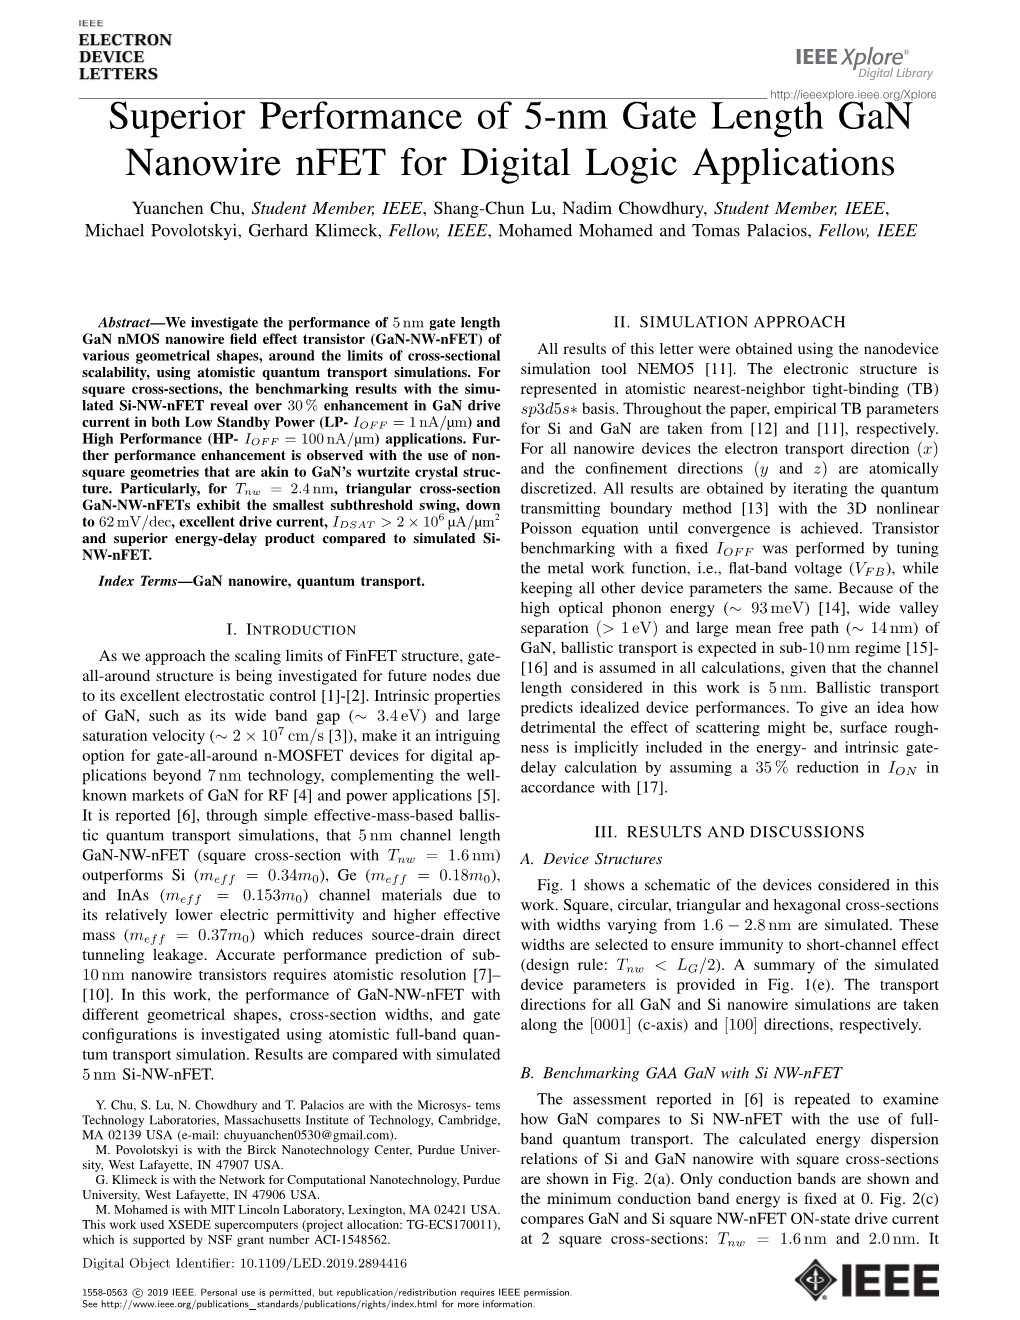 Superior Performance of 5-Nm Gate Length Gan Nanowire Nfet For